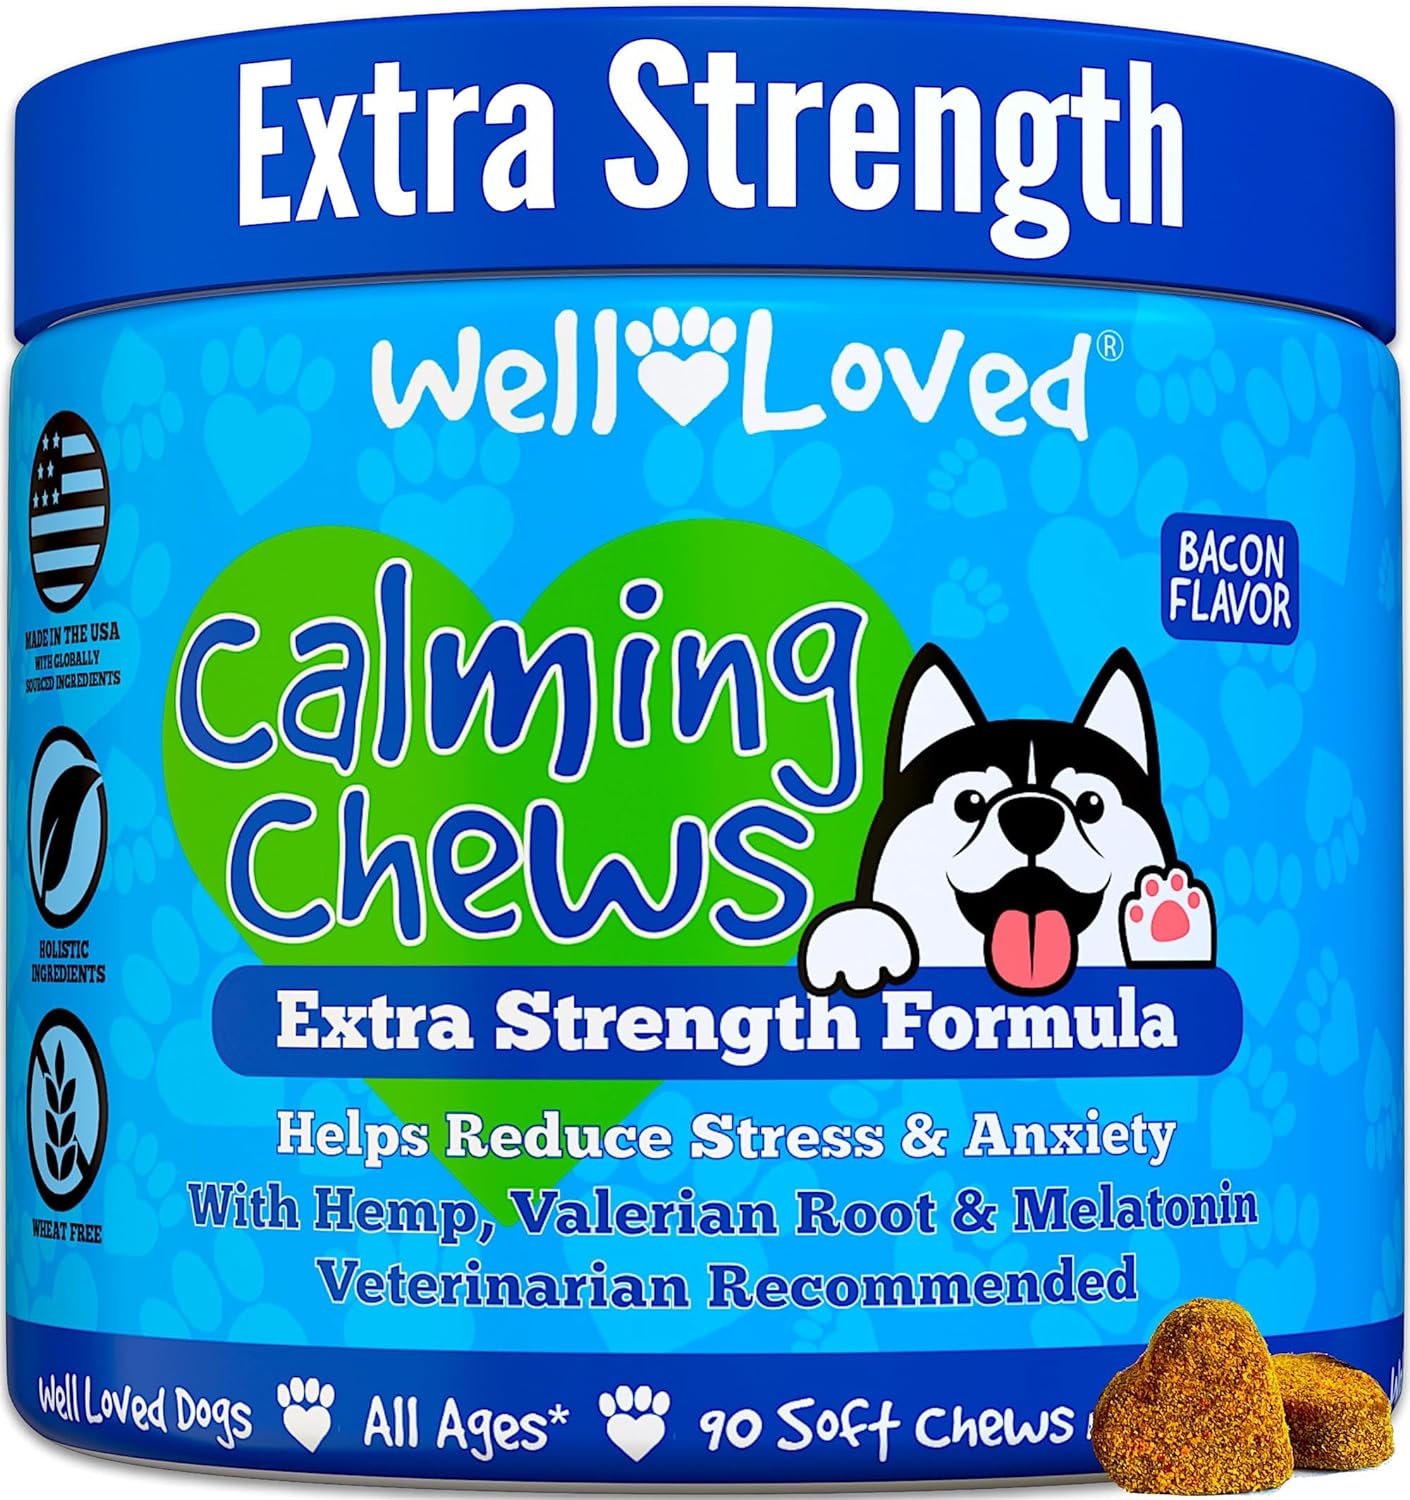 Calming Chews for Dogs - Dog Anxiety Relief, Made in USA, Vet Recommended, Dog Calming Chews - Anxiety Relief Treats, Melatonin for Dogs, Hemp Dog Treats for Calming, Extra Strength